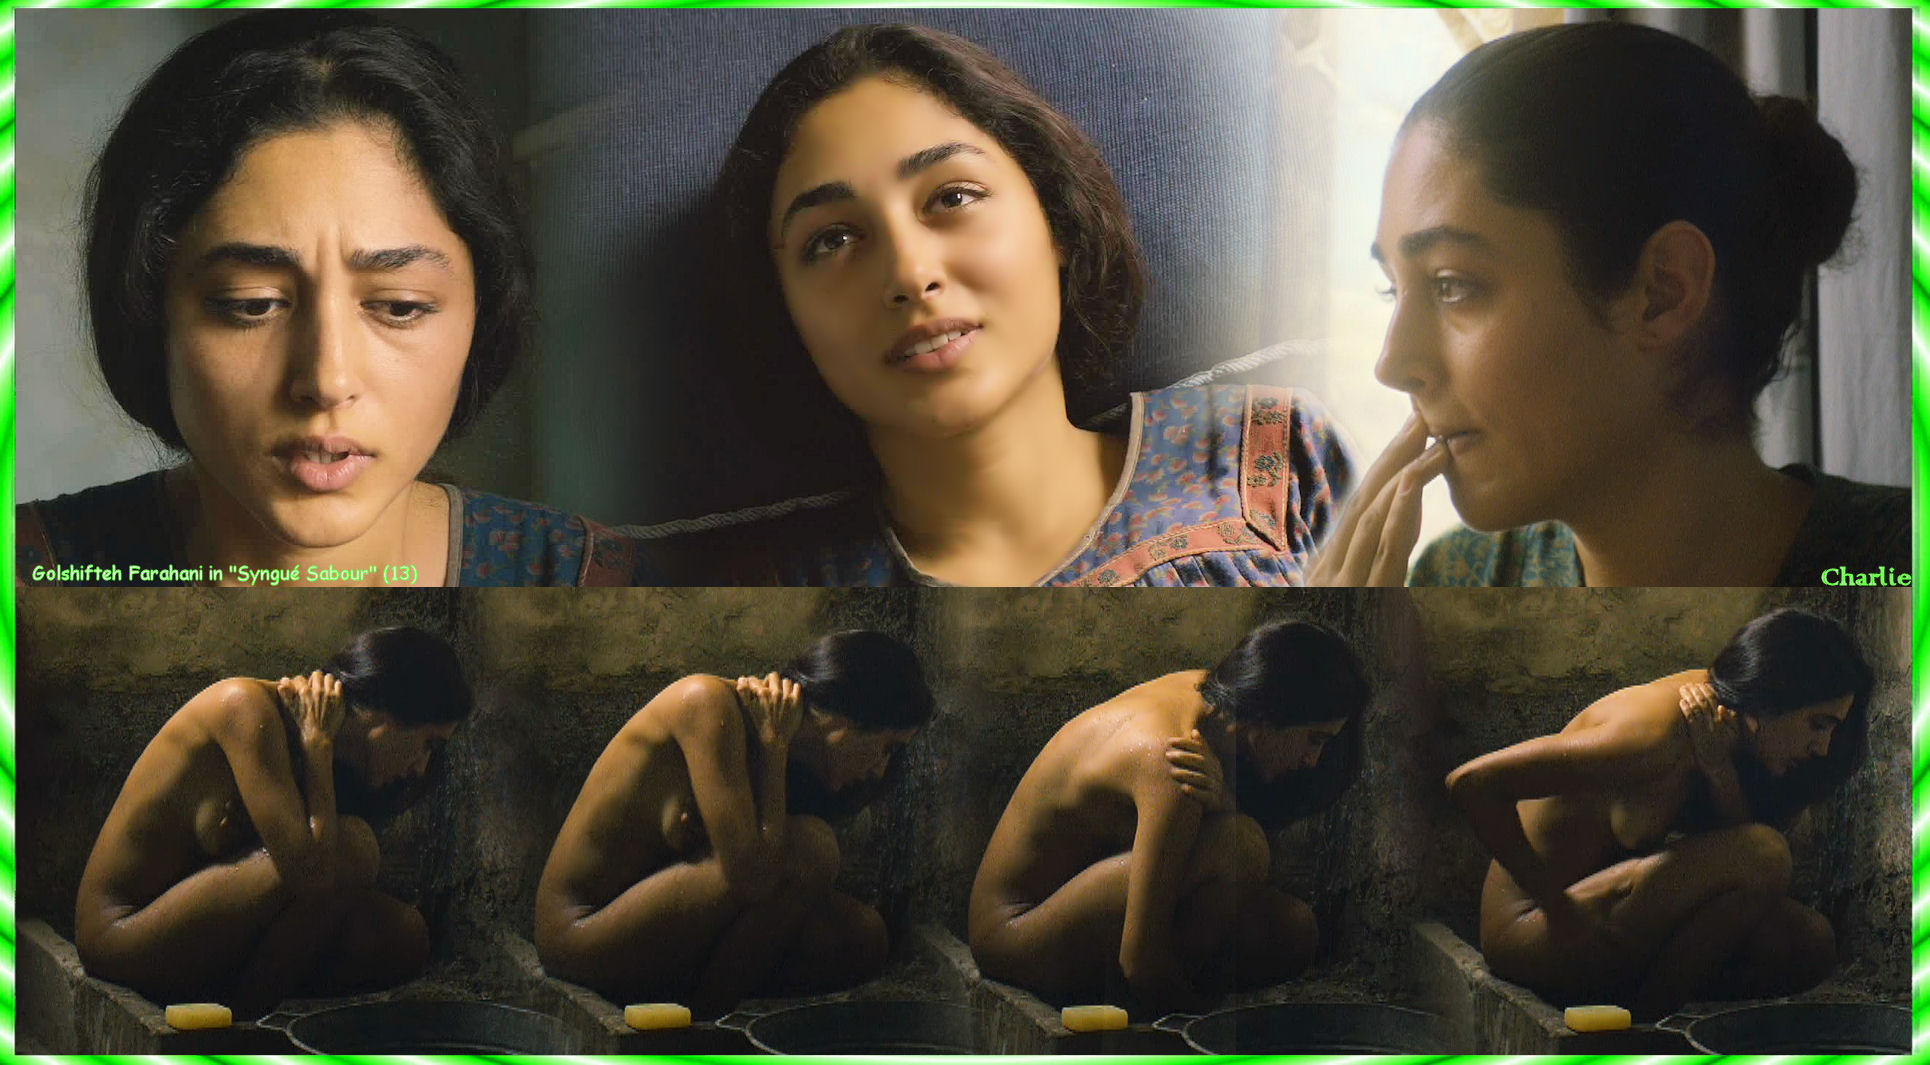 charles clute recommends Golshifteh Farahani Nude